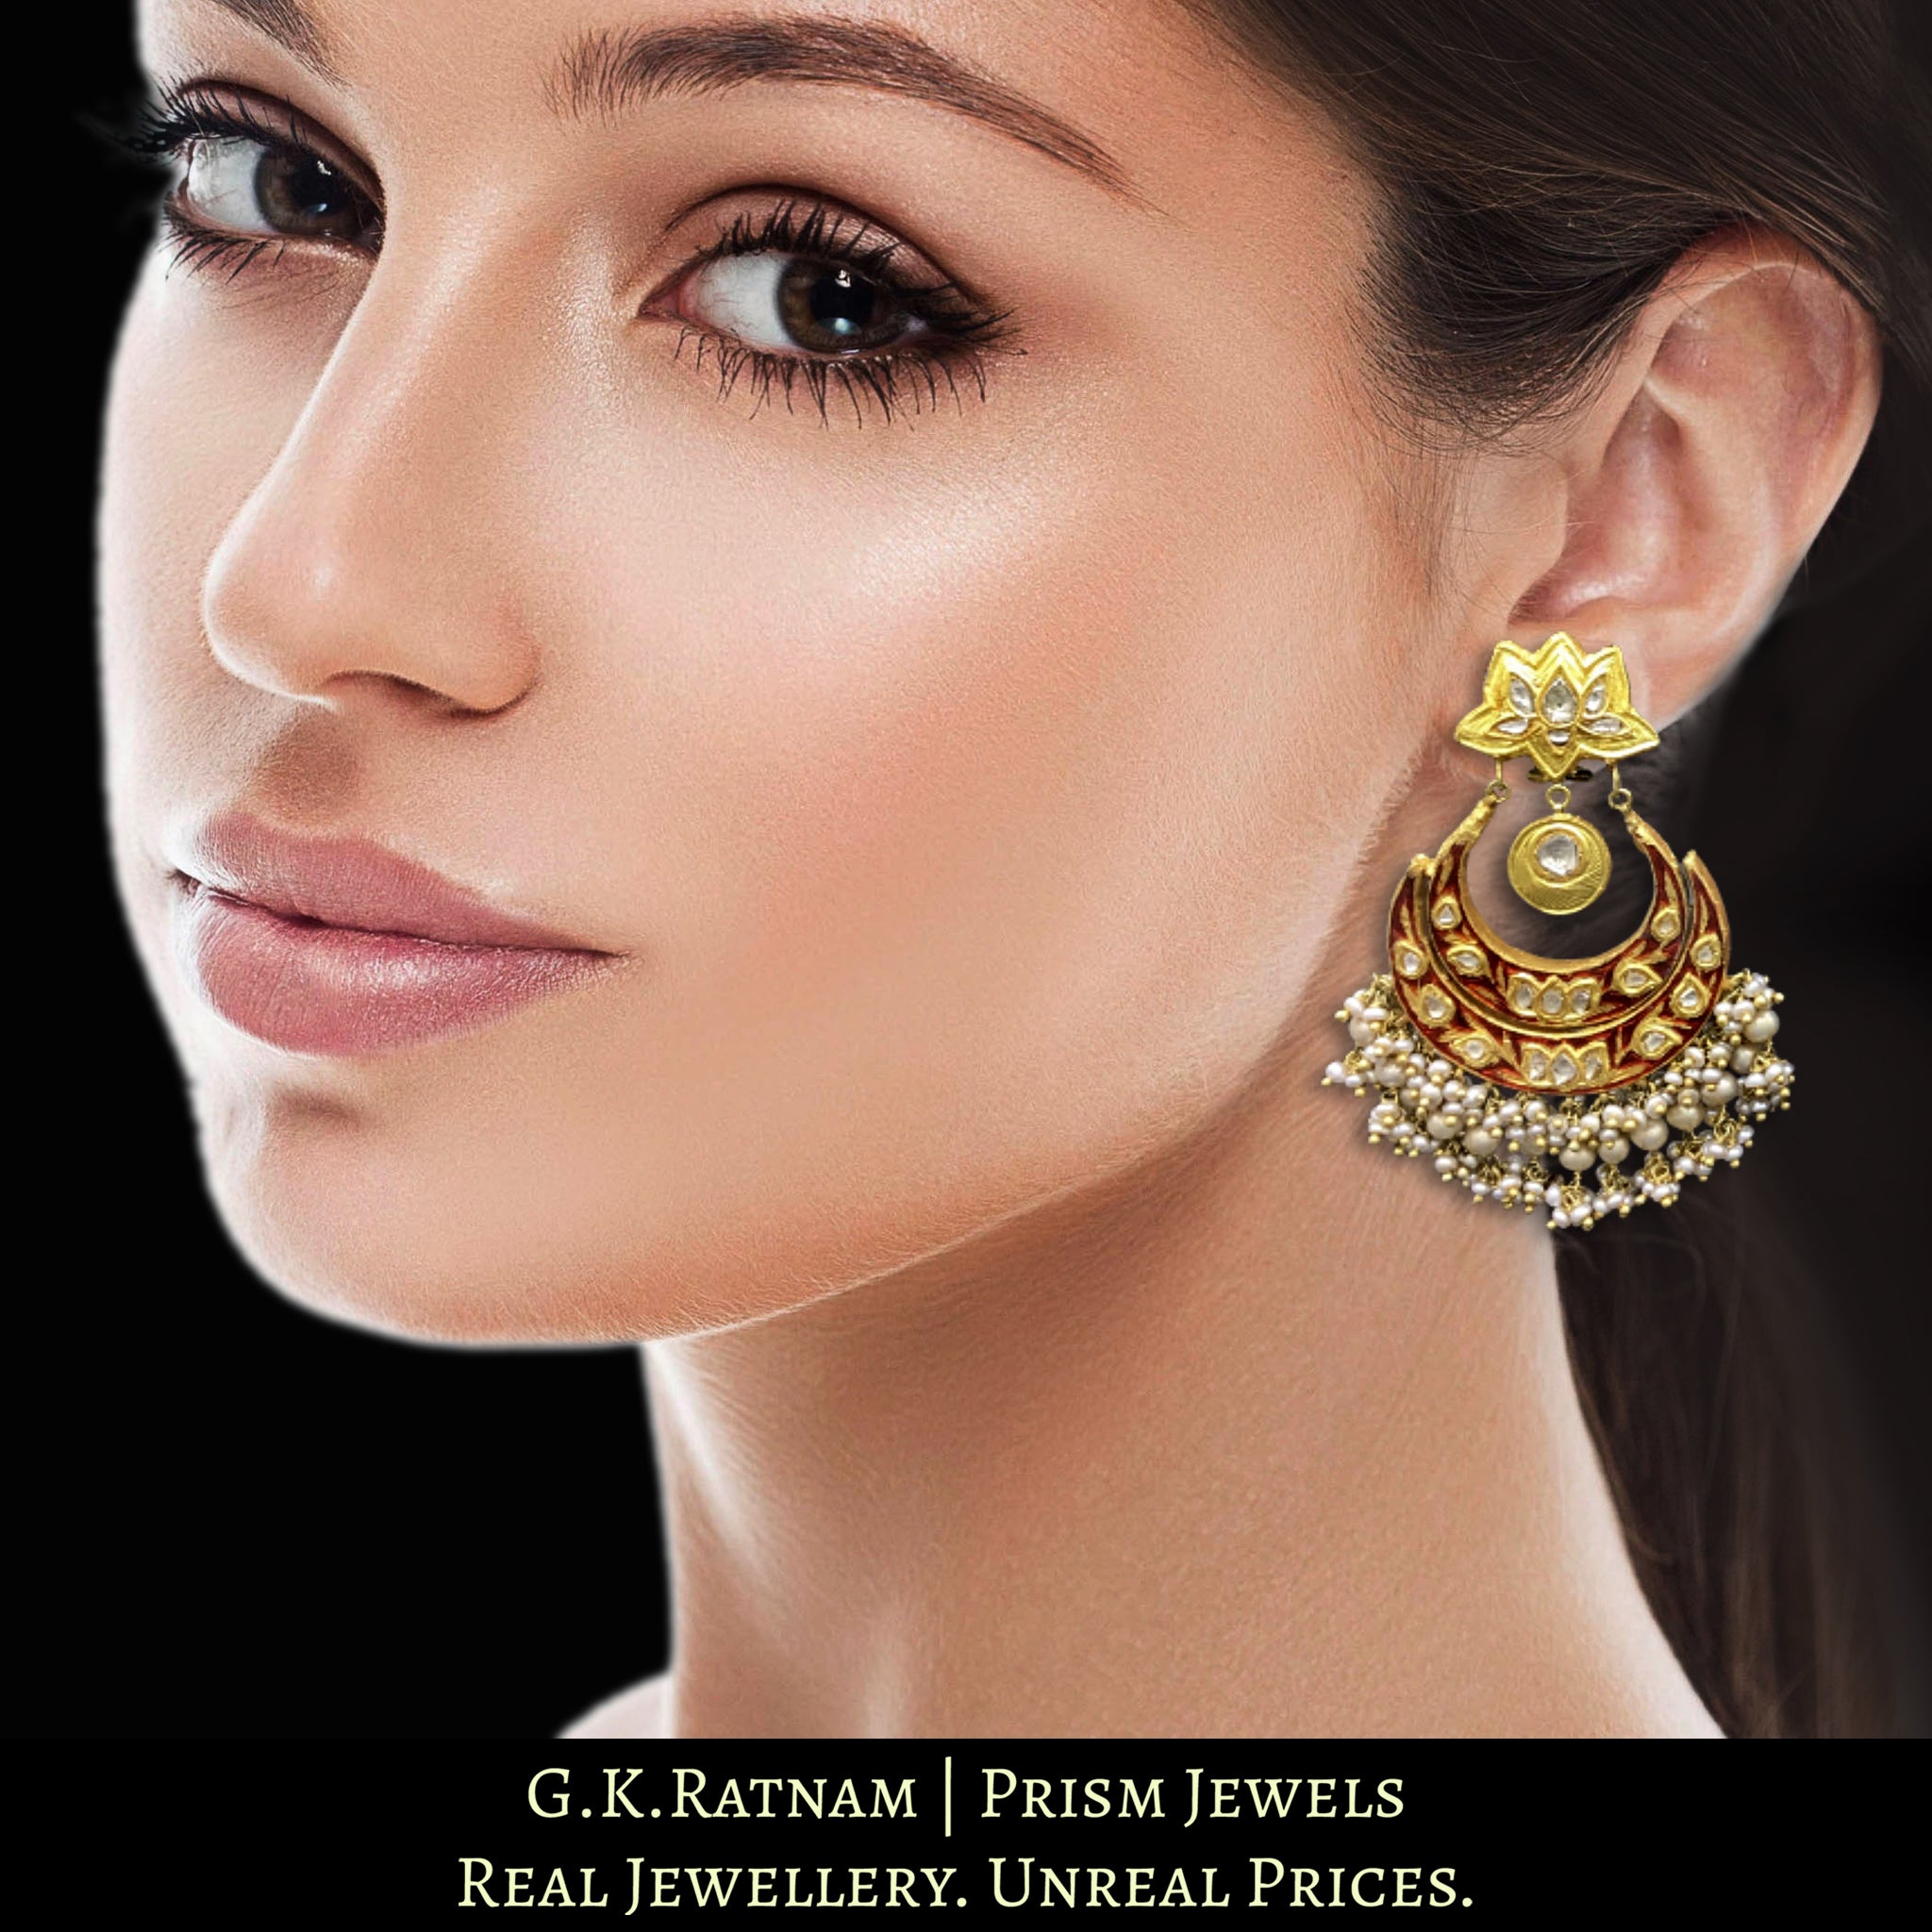 23k Gold and Diamond Polki Reversible Chand Bali Earring Pair with intricate enamelling